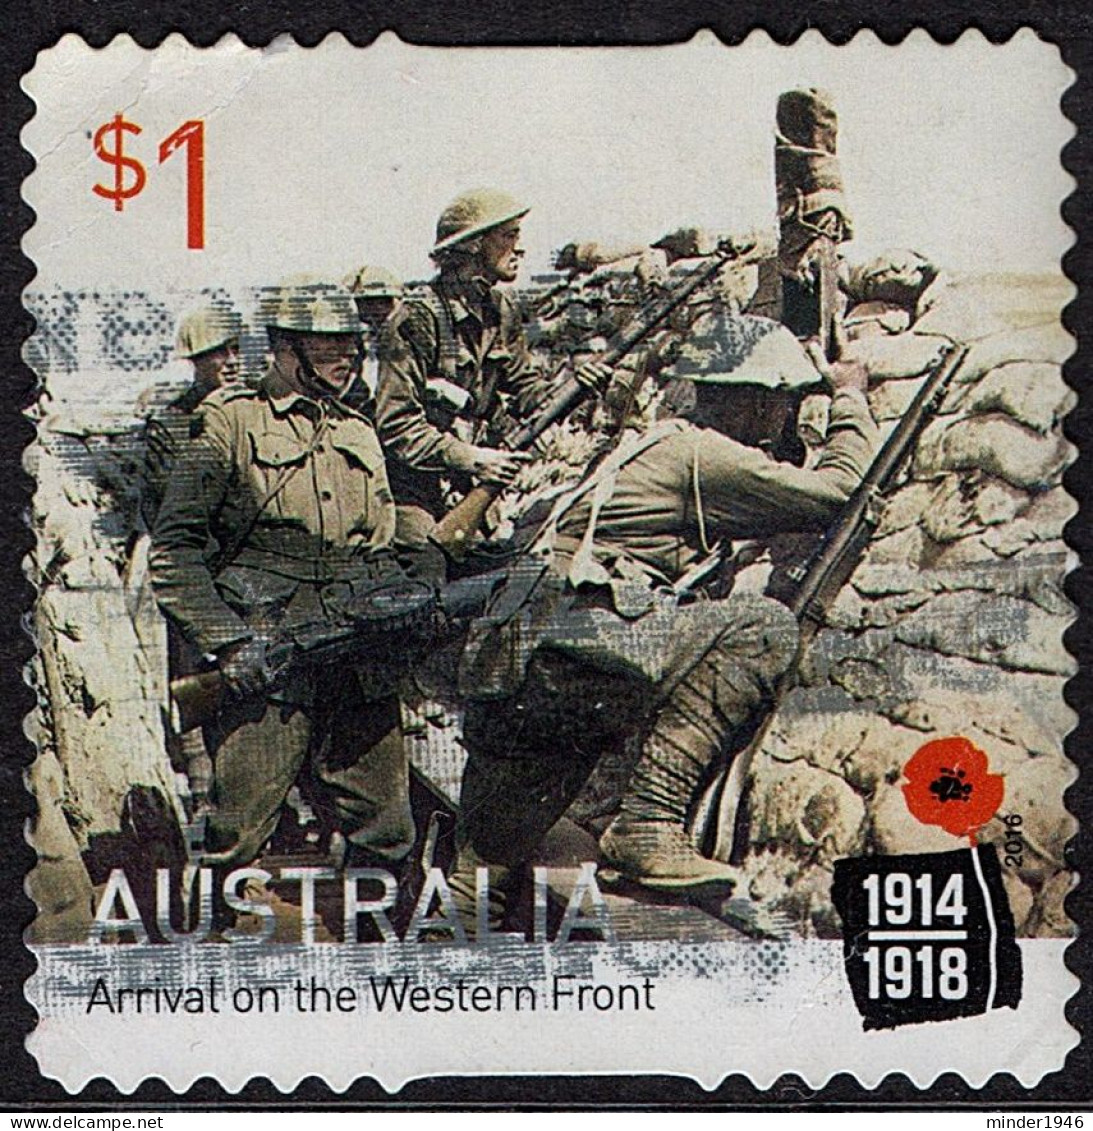 AUSTRALIA 2016 $1 Multicoloured, 100th Anniv Of World War I-Arrival On The Western Front Self Adhesive FU - Used Stamps